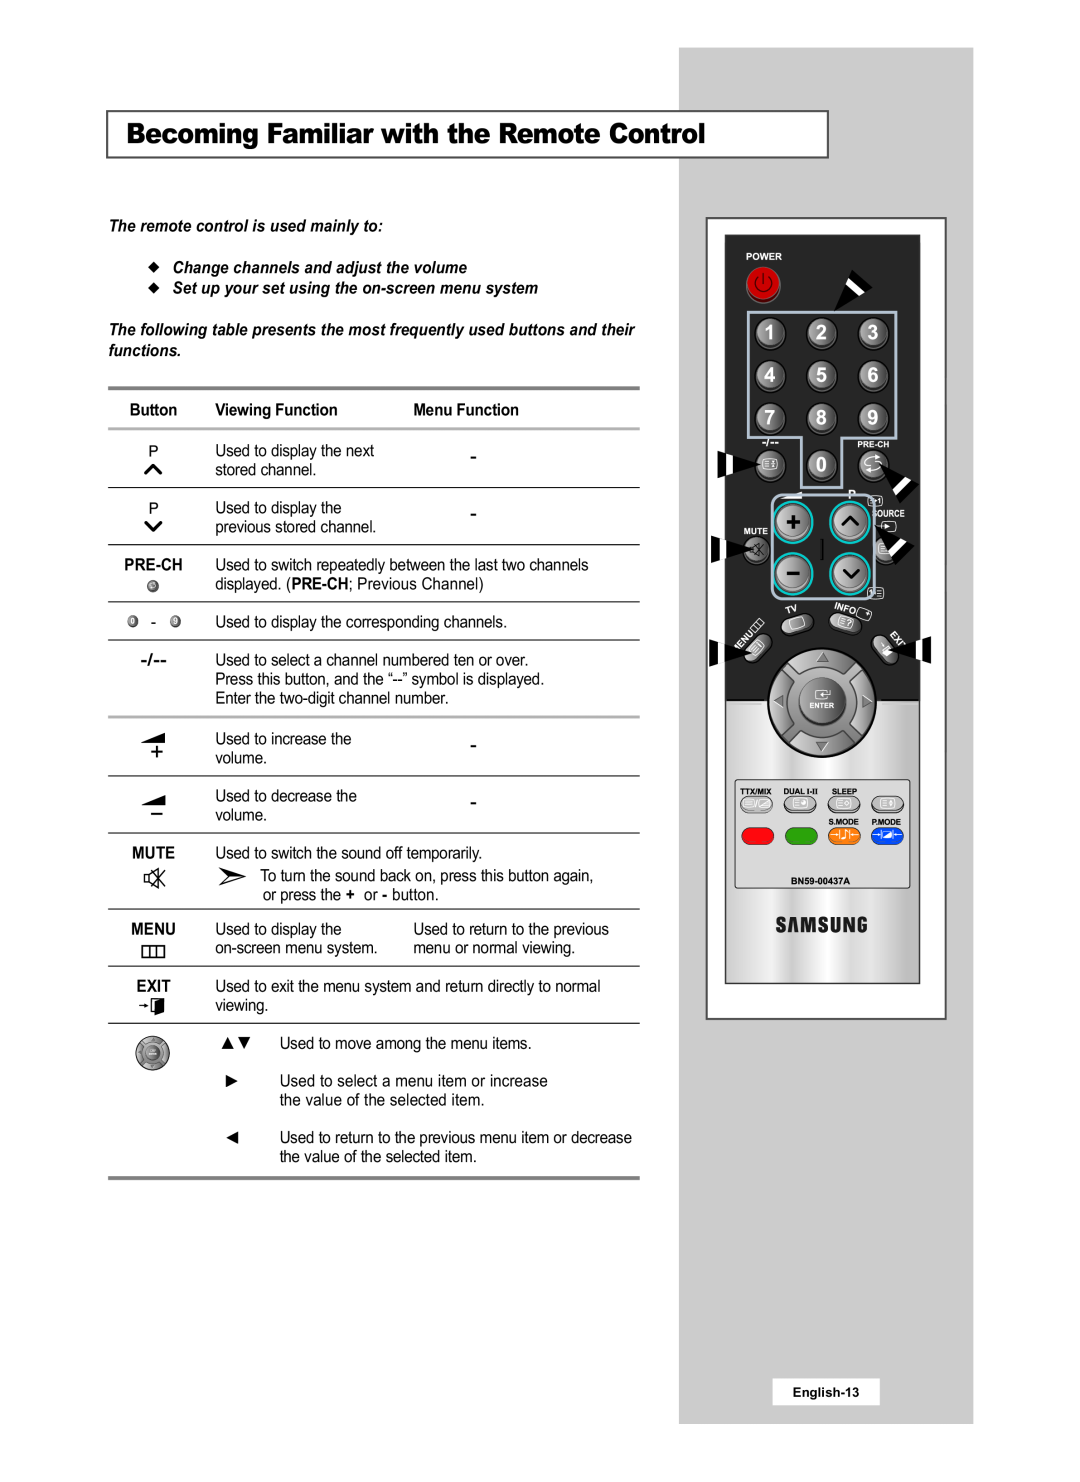 Samsung LE15E31S Becoming Familiar with the Remote Control, The remote control is used mainly to, Button, Viewing Function 